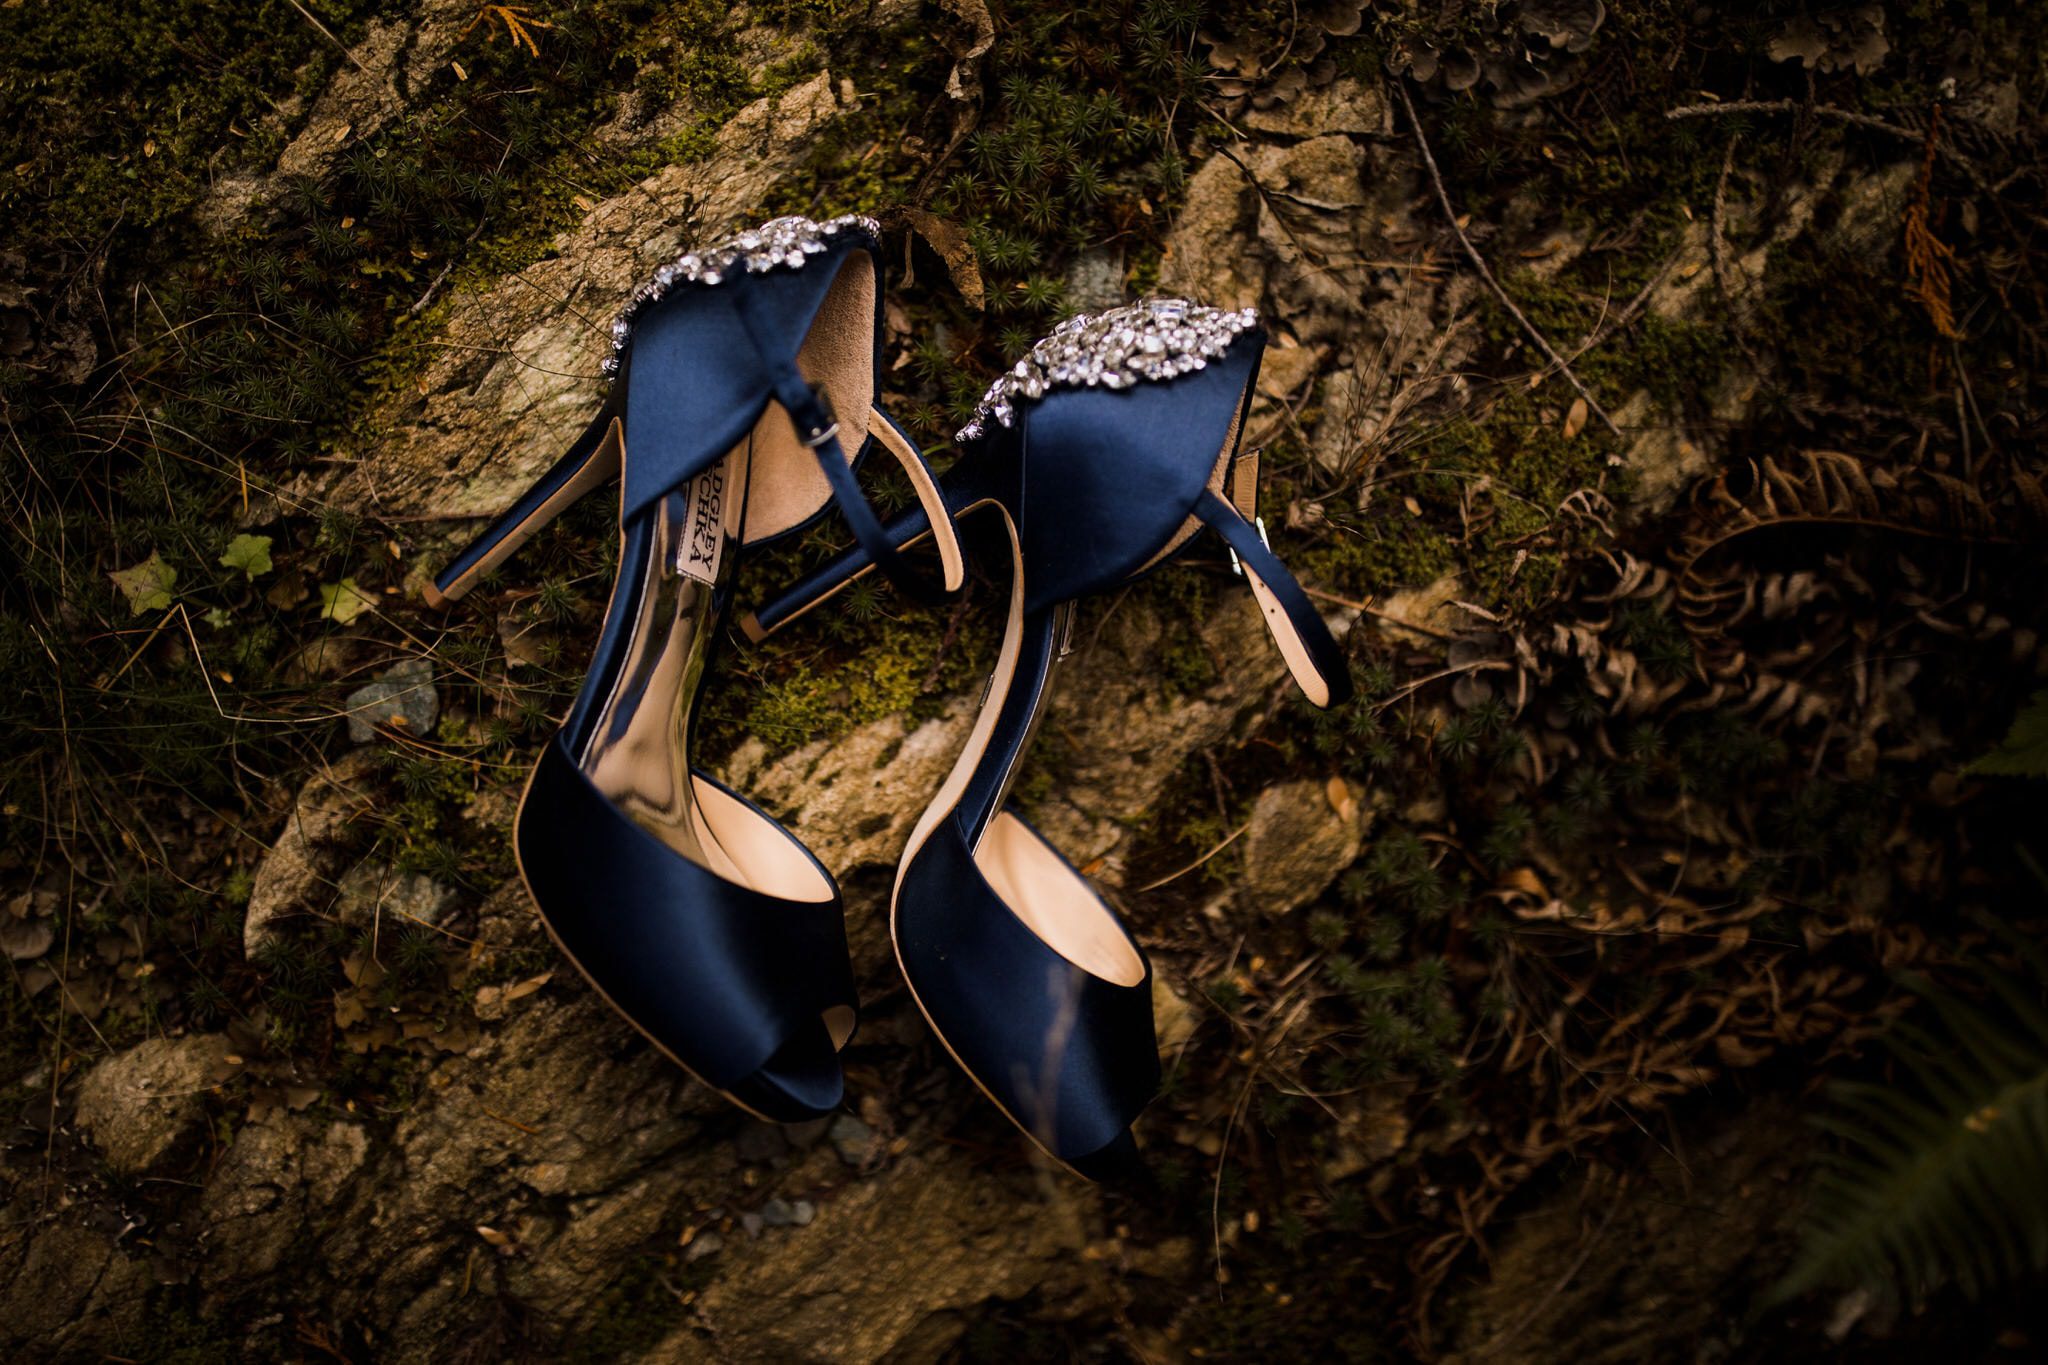 Blue Badgley Mishka wedding shoes on moss in the forests of Whistler Mountain. Destination wedding photographer Brent Calis.